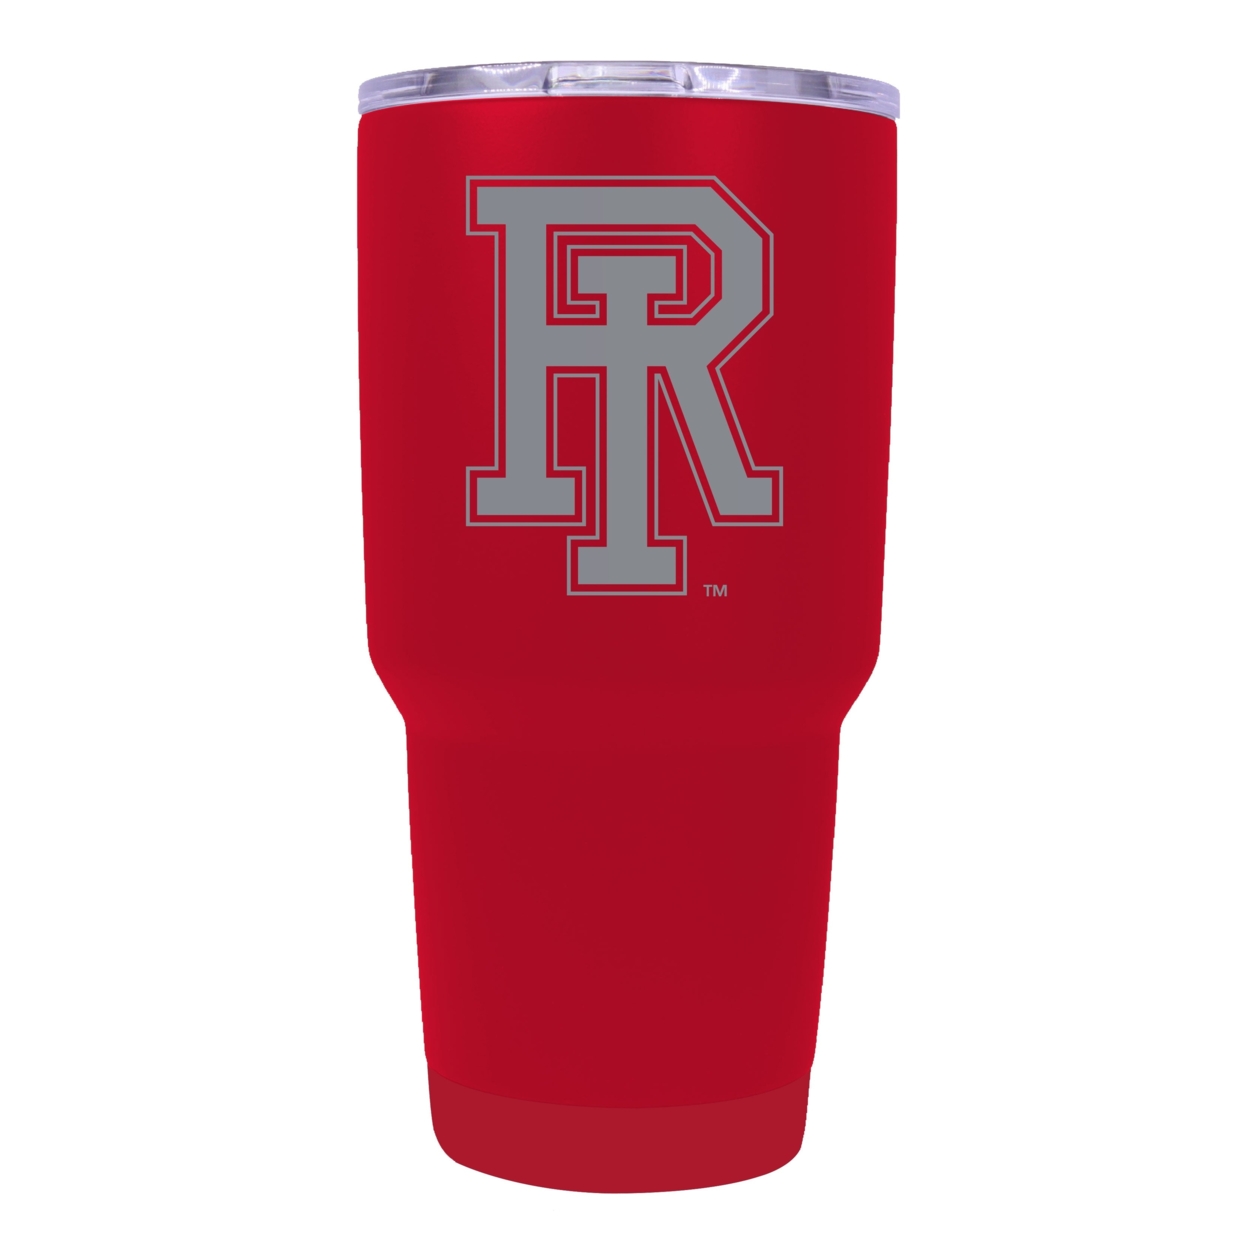 Rhode Island University 24 Oz Laser Engraved Stainless Steel Insulated Tumbler - Choose Your Color. - Navy